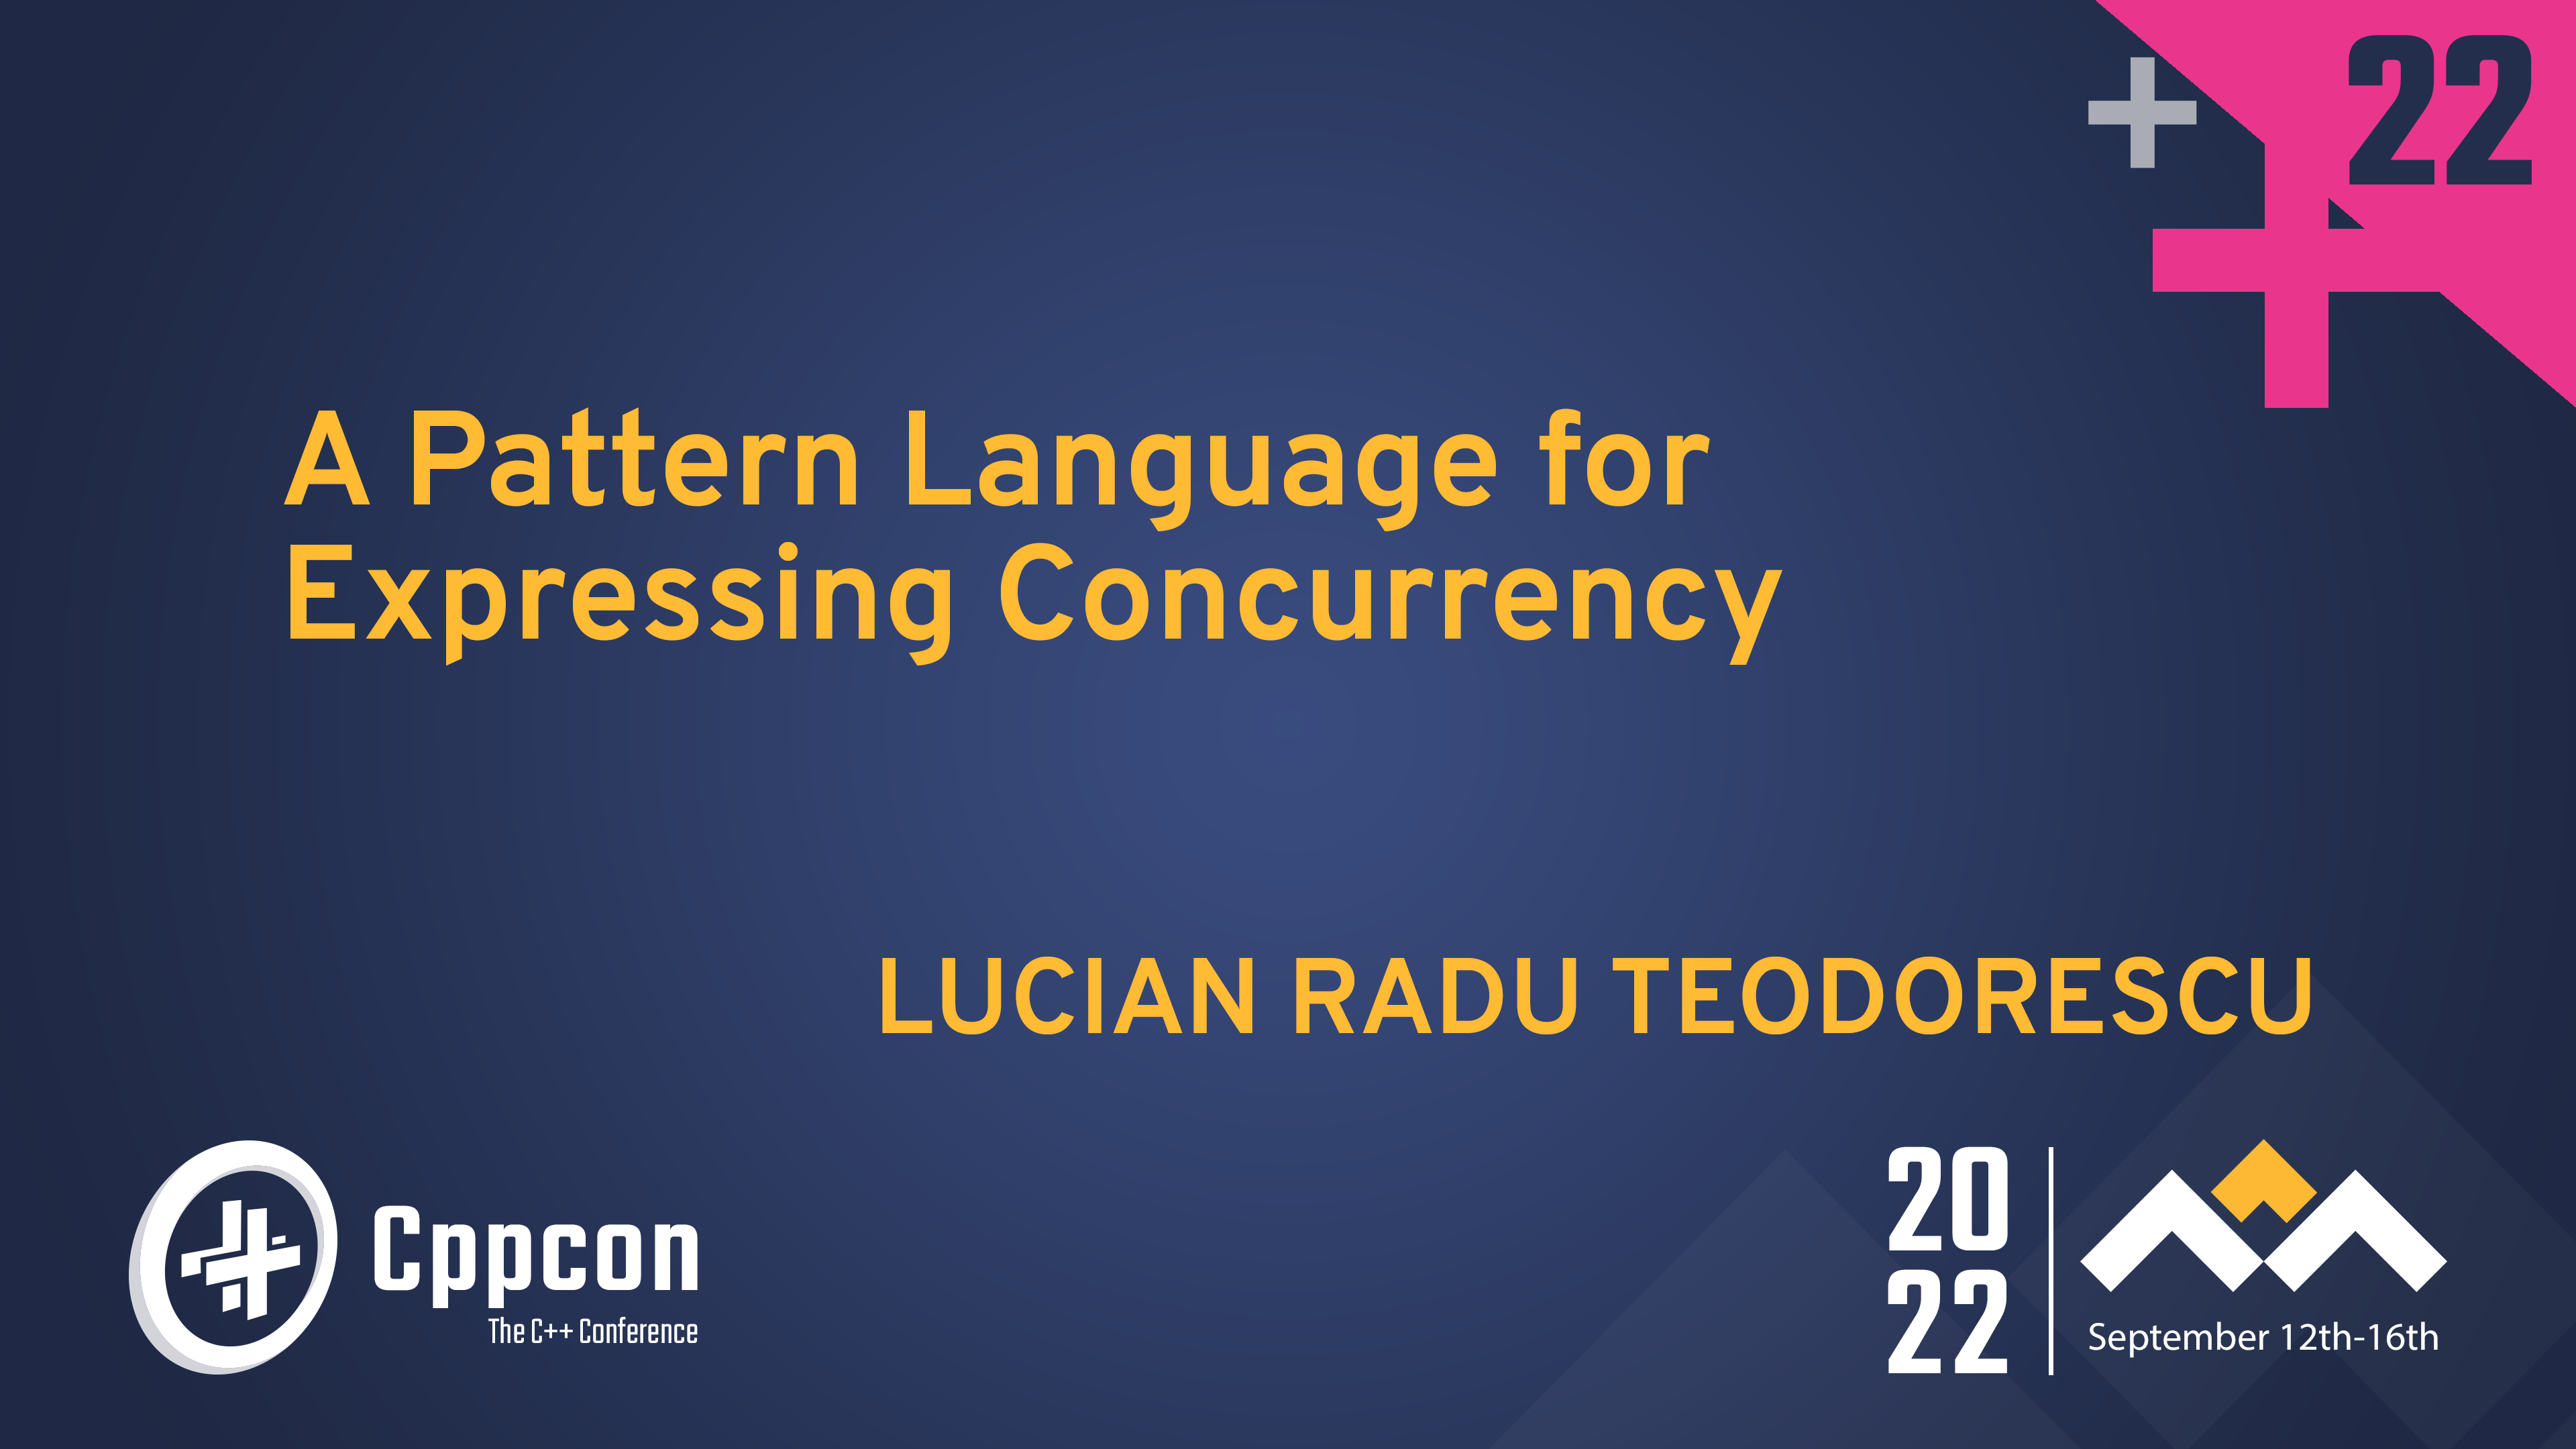 A Pattern Language for Expressing Concurrency